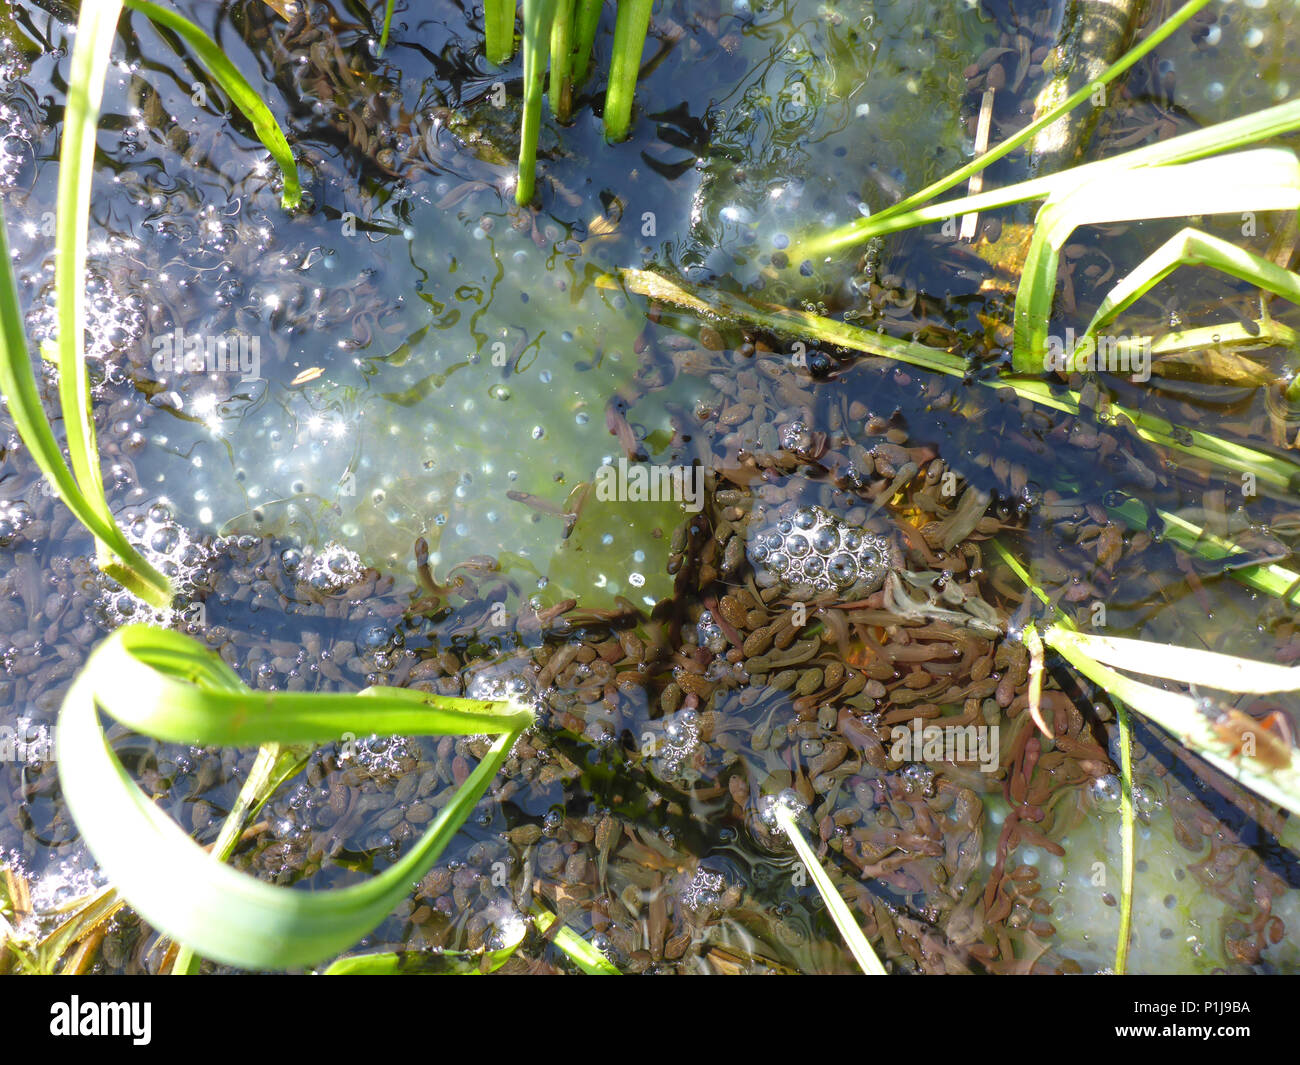 tadpoles and frog spawn from european common frog Stock Photo